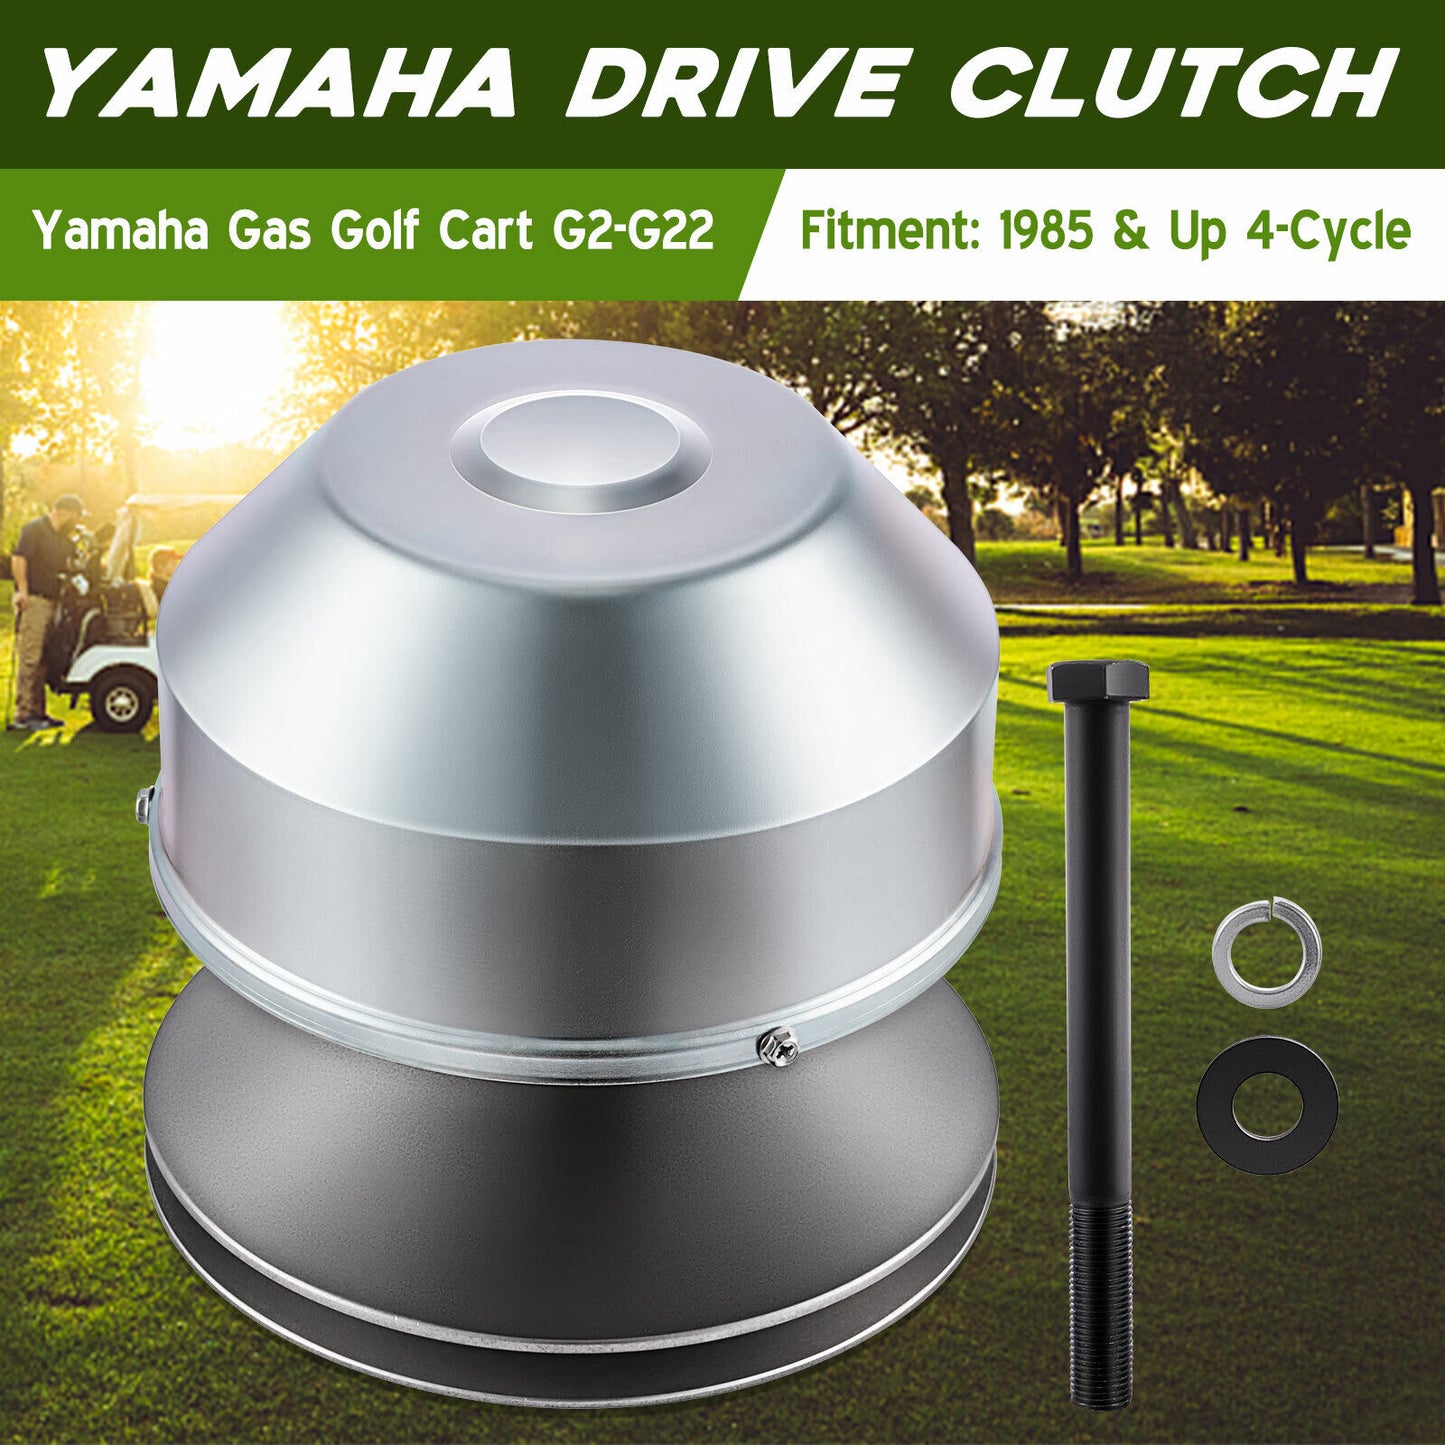 Yamaha Drive Clutch For 4 Cycle G2,G8,G9,G14,G16,G19, & G22 Golf Carts 1985 Up